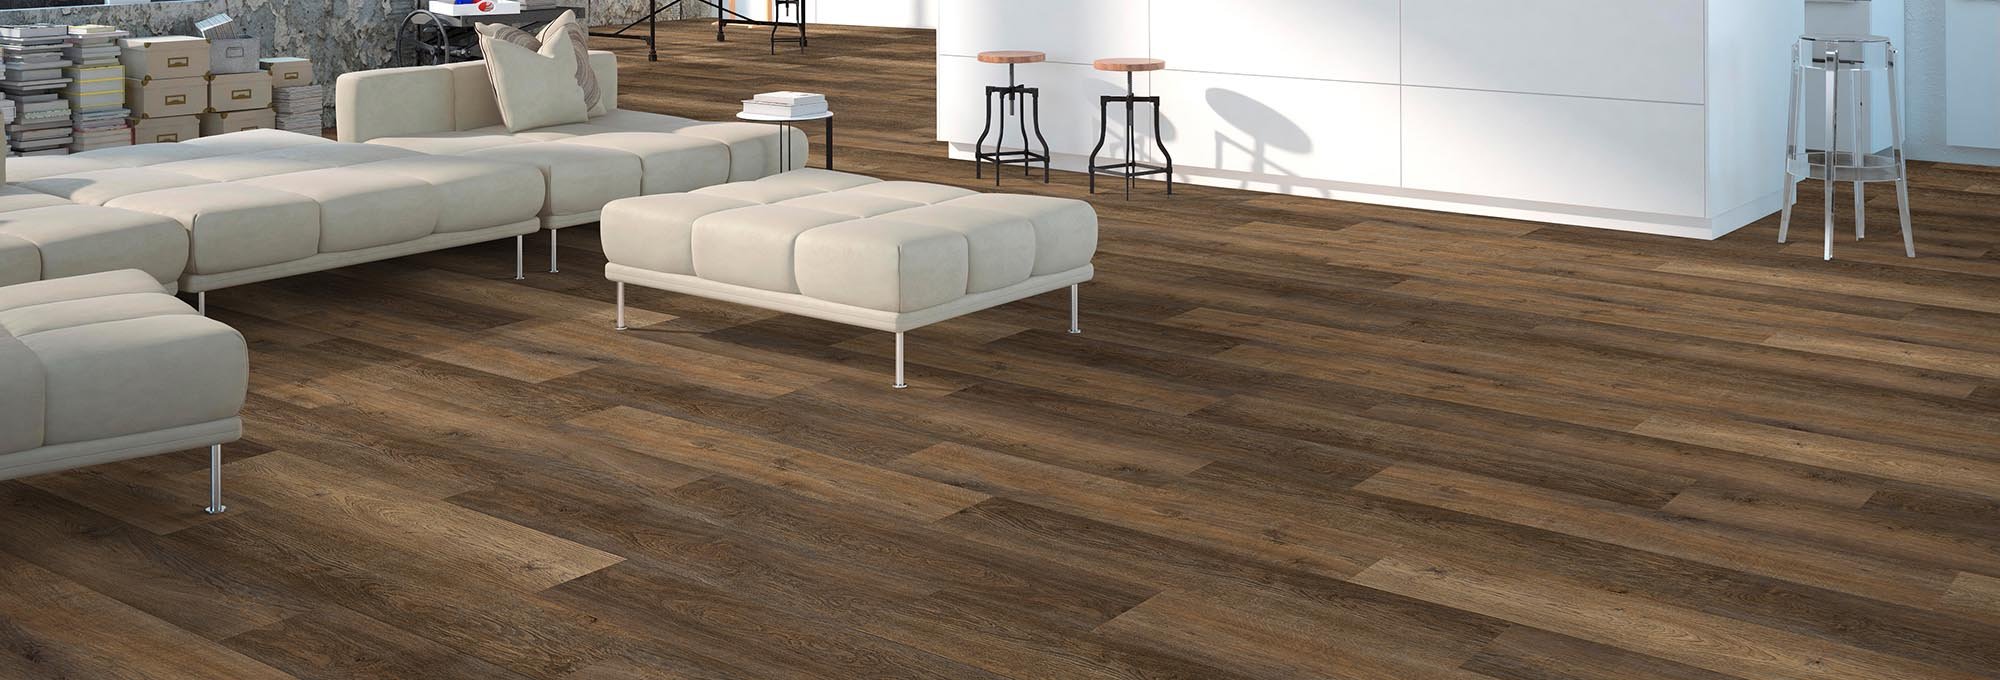 Shop Flooring Products from Cardinal Flooring and Supply in Klamath Falls, OR